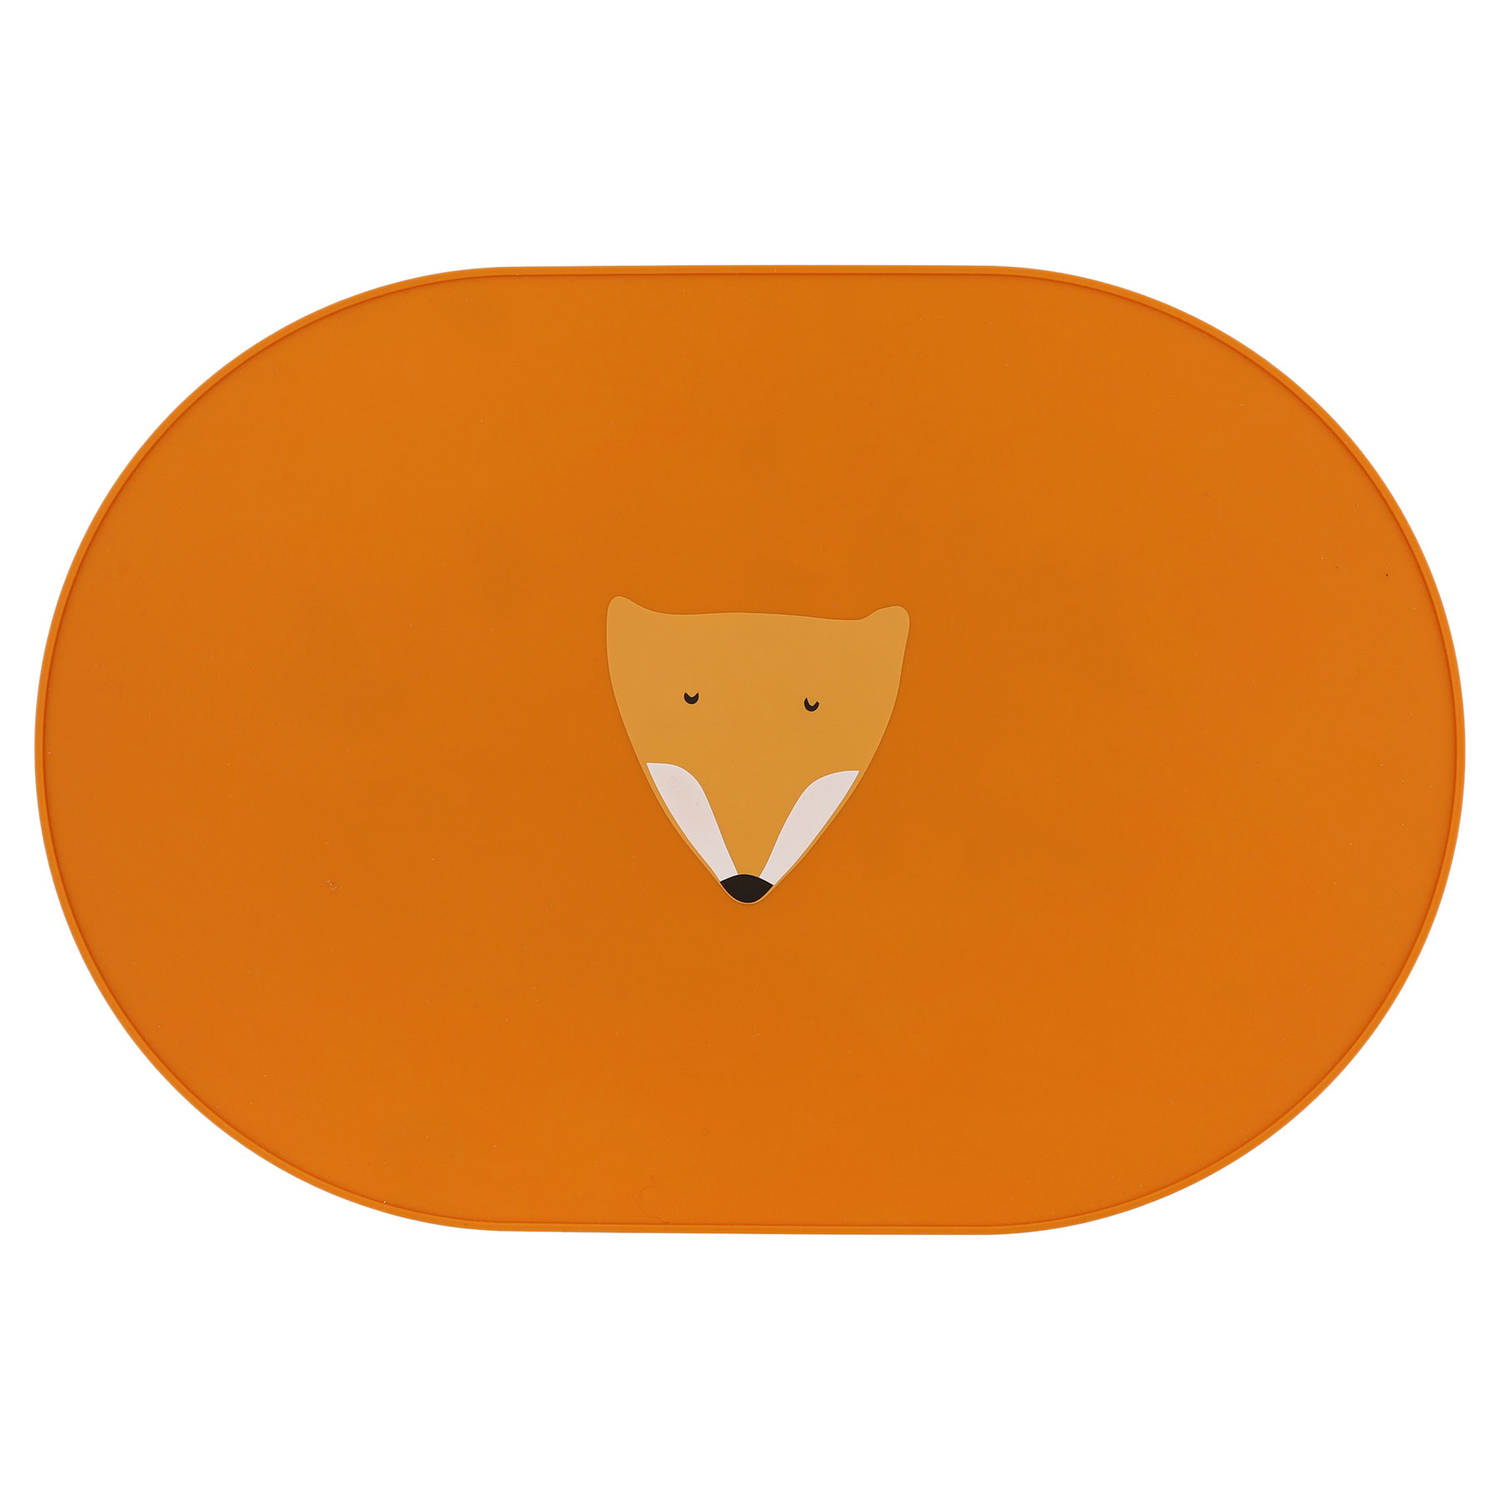 Trixie Silicone placemat - Mr. Fox